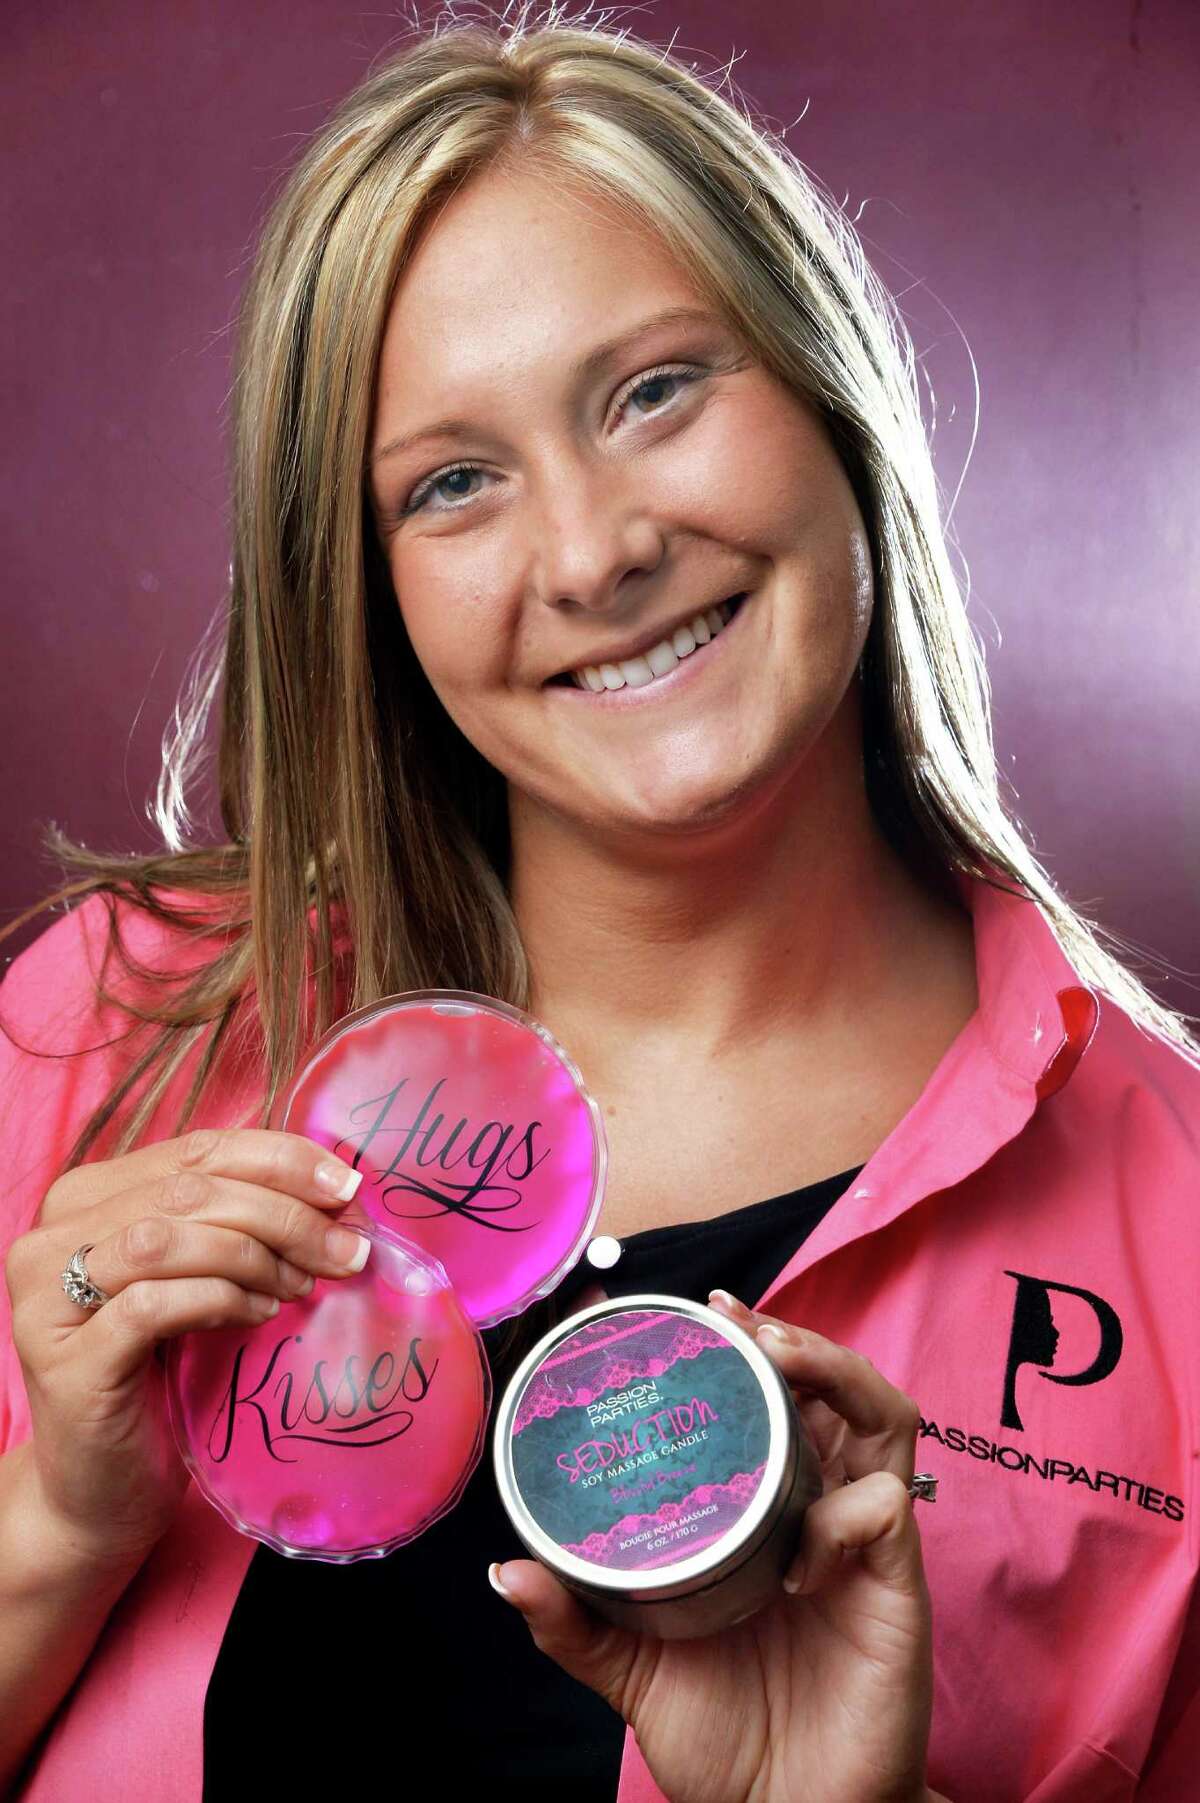 Sophia Holcomb with Passion Parties, an "adult sensual products" company. (John Carl D'Annibale / Times Union)